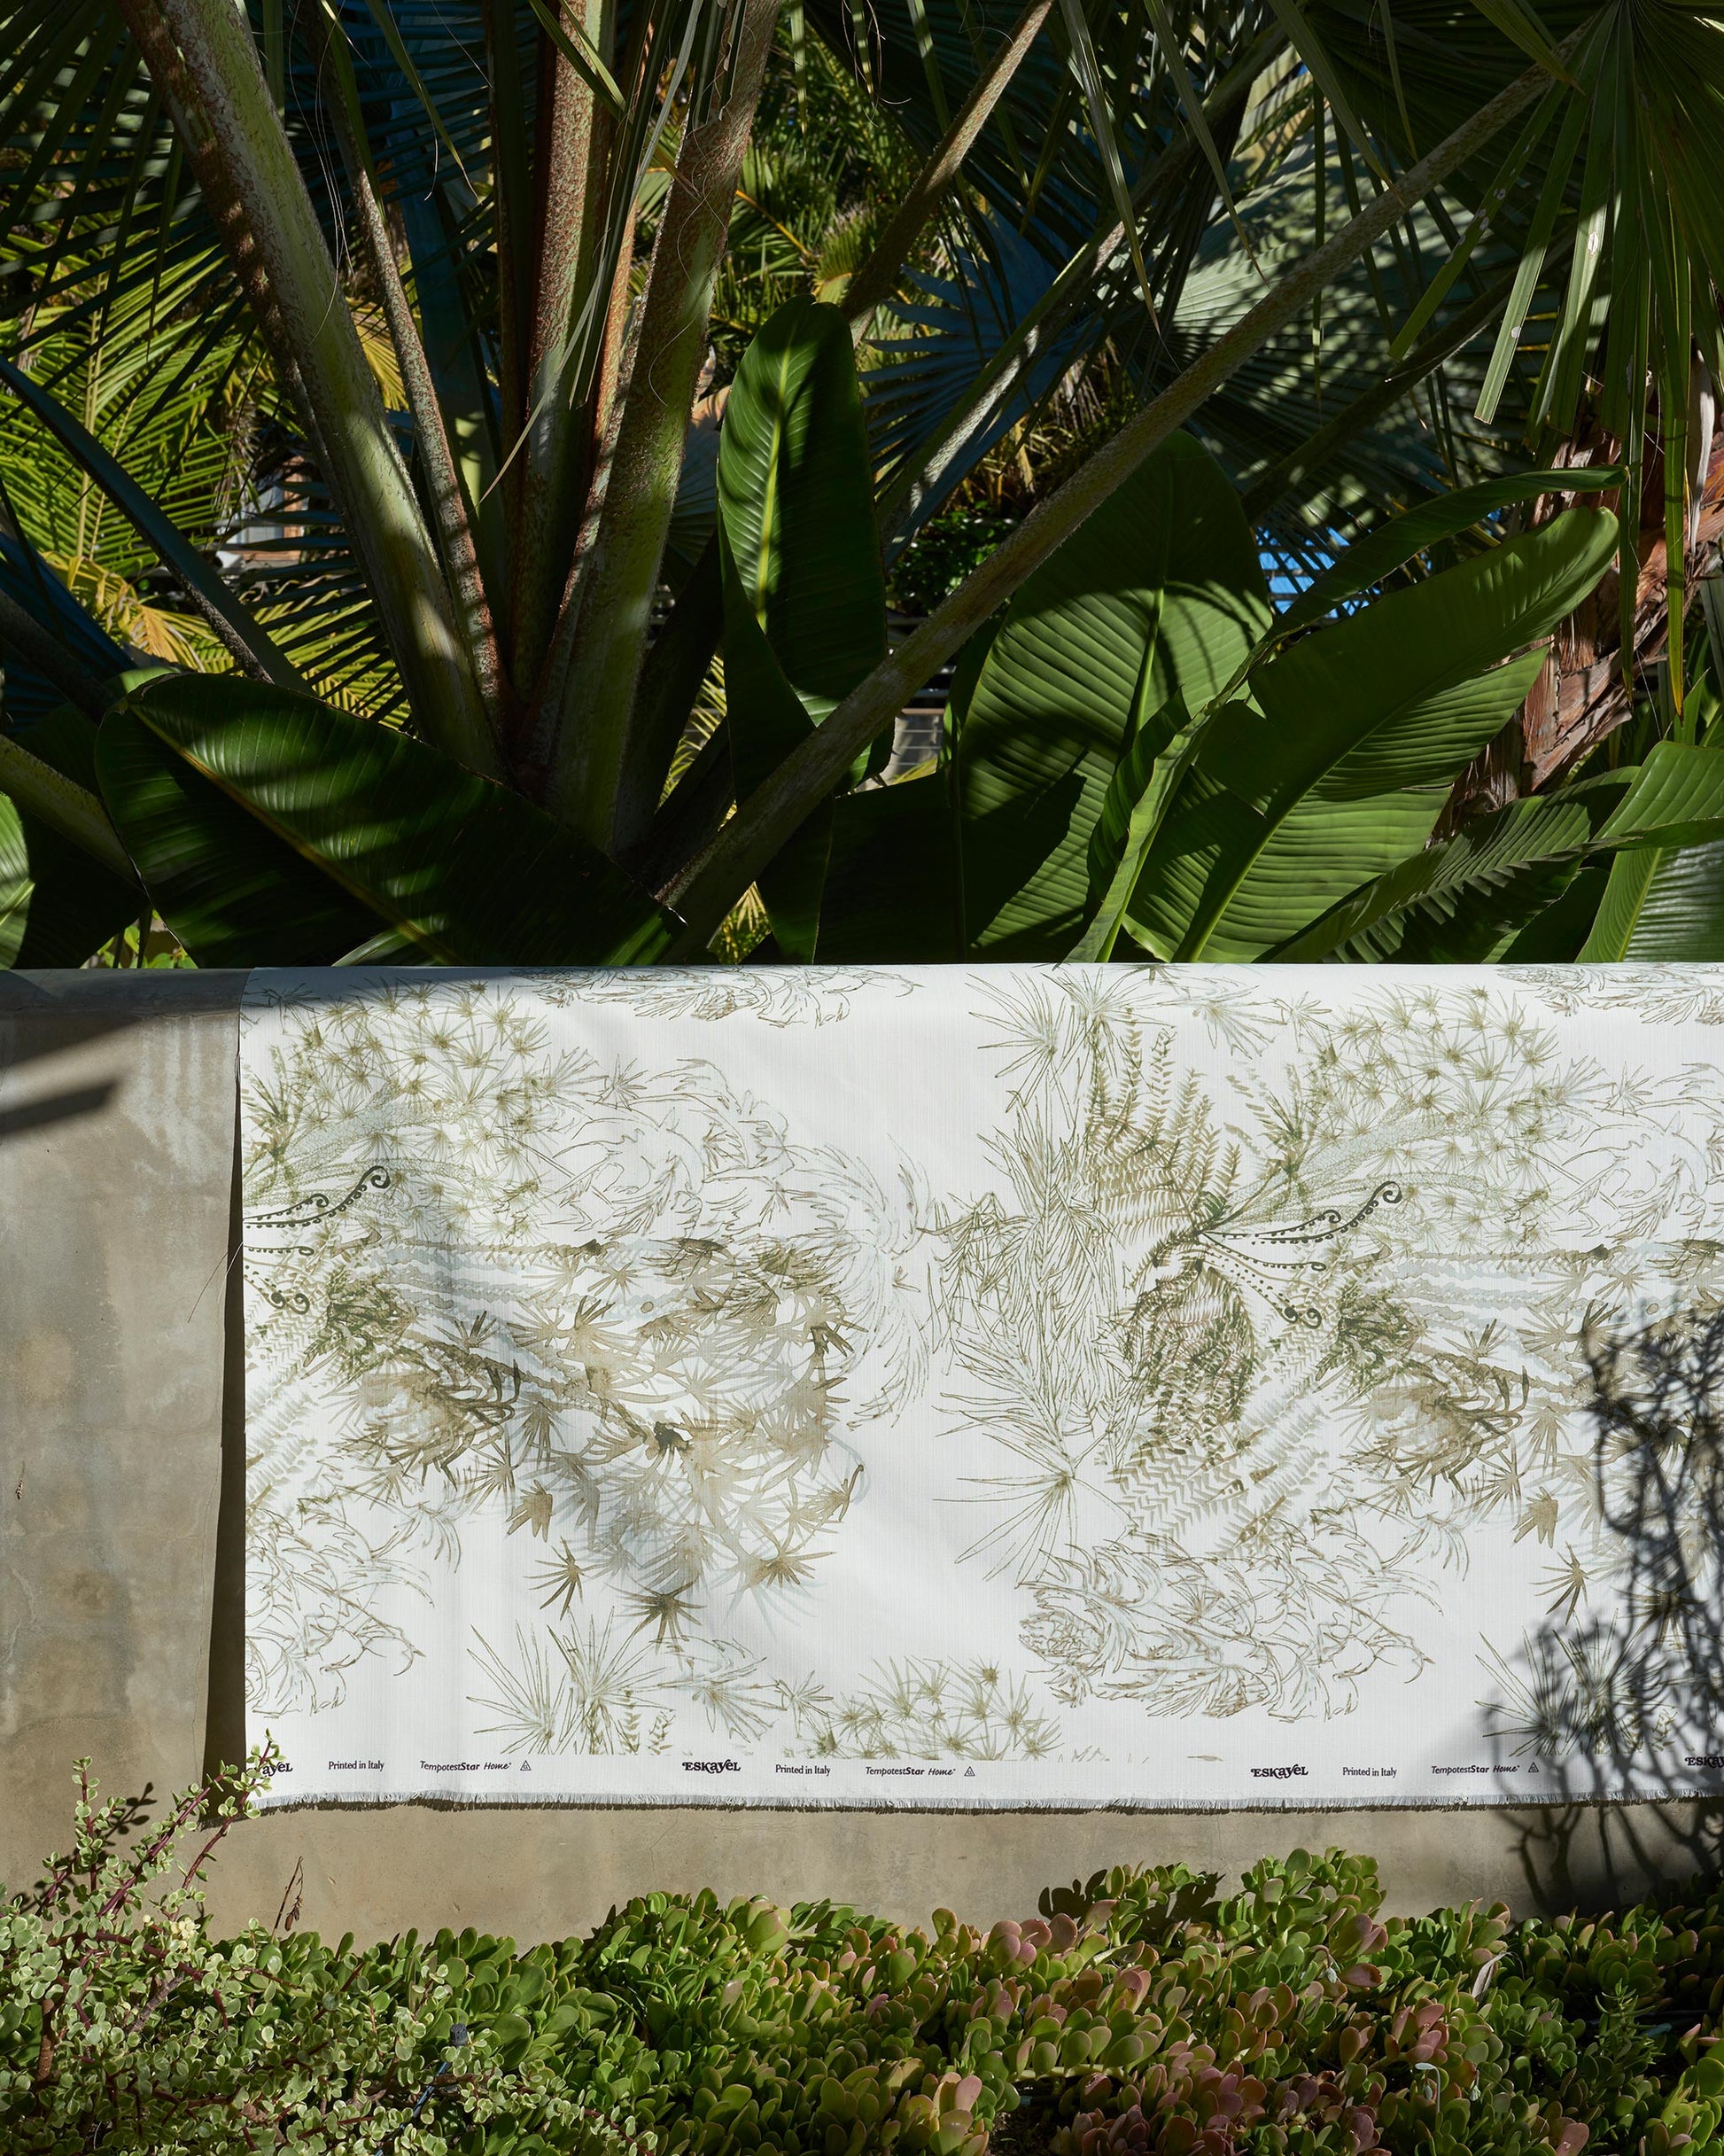 A palm tree decorates the wall, complementing the Salentu Collection's luxury Domenica Performance Fabric Brush featured in the Domenica pattern